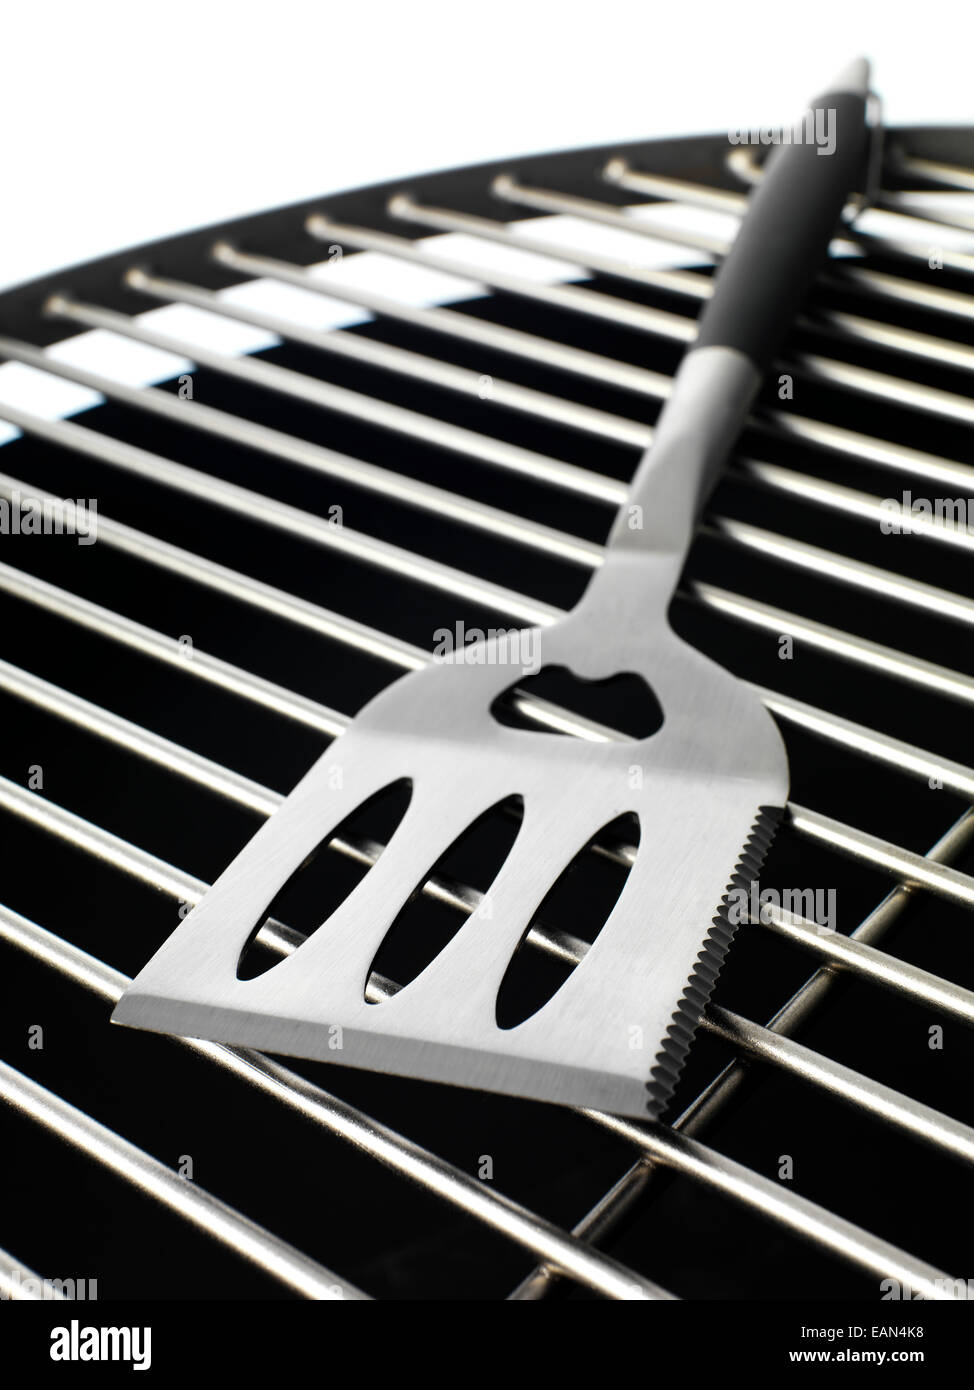 Kettle BBQ with tools Stock Photo